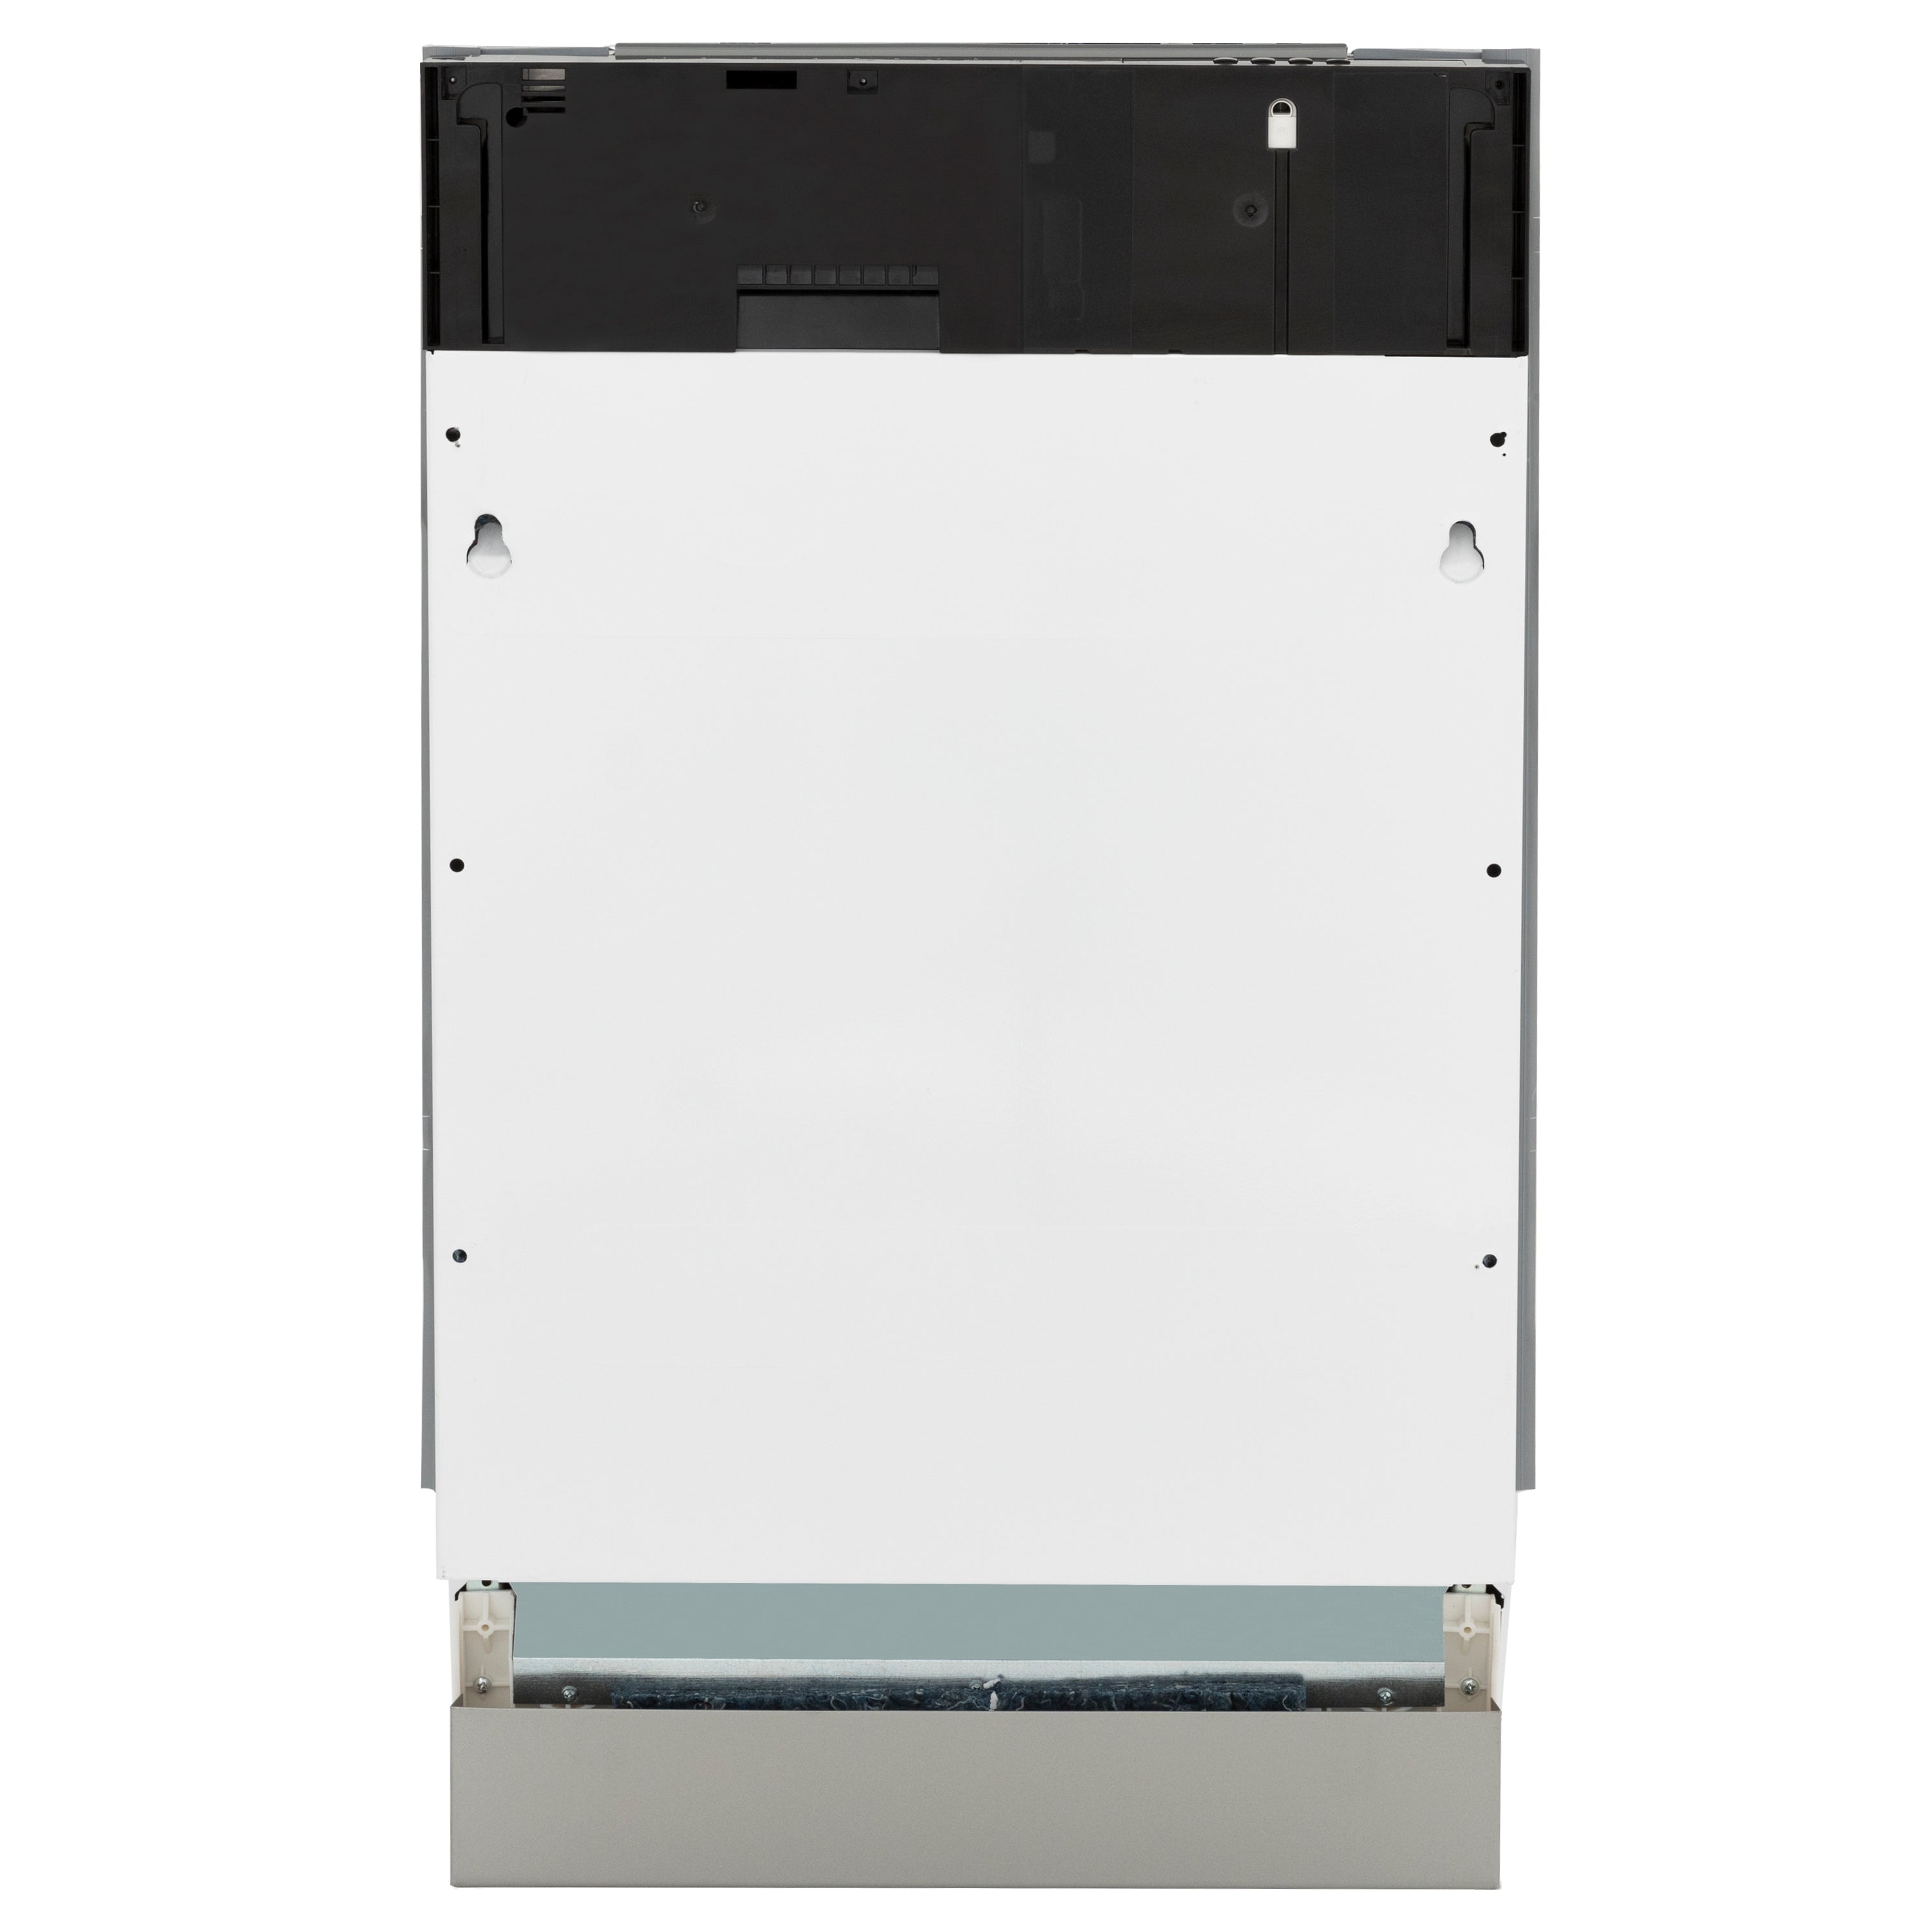 ZLINE 18" Tallac Series 3rd Rack Top Control Built-In Dishwasher in Custom Panel Ready with Stainless Steel Tub, 51dBa